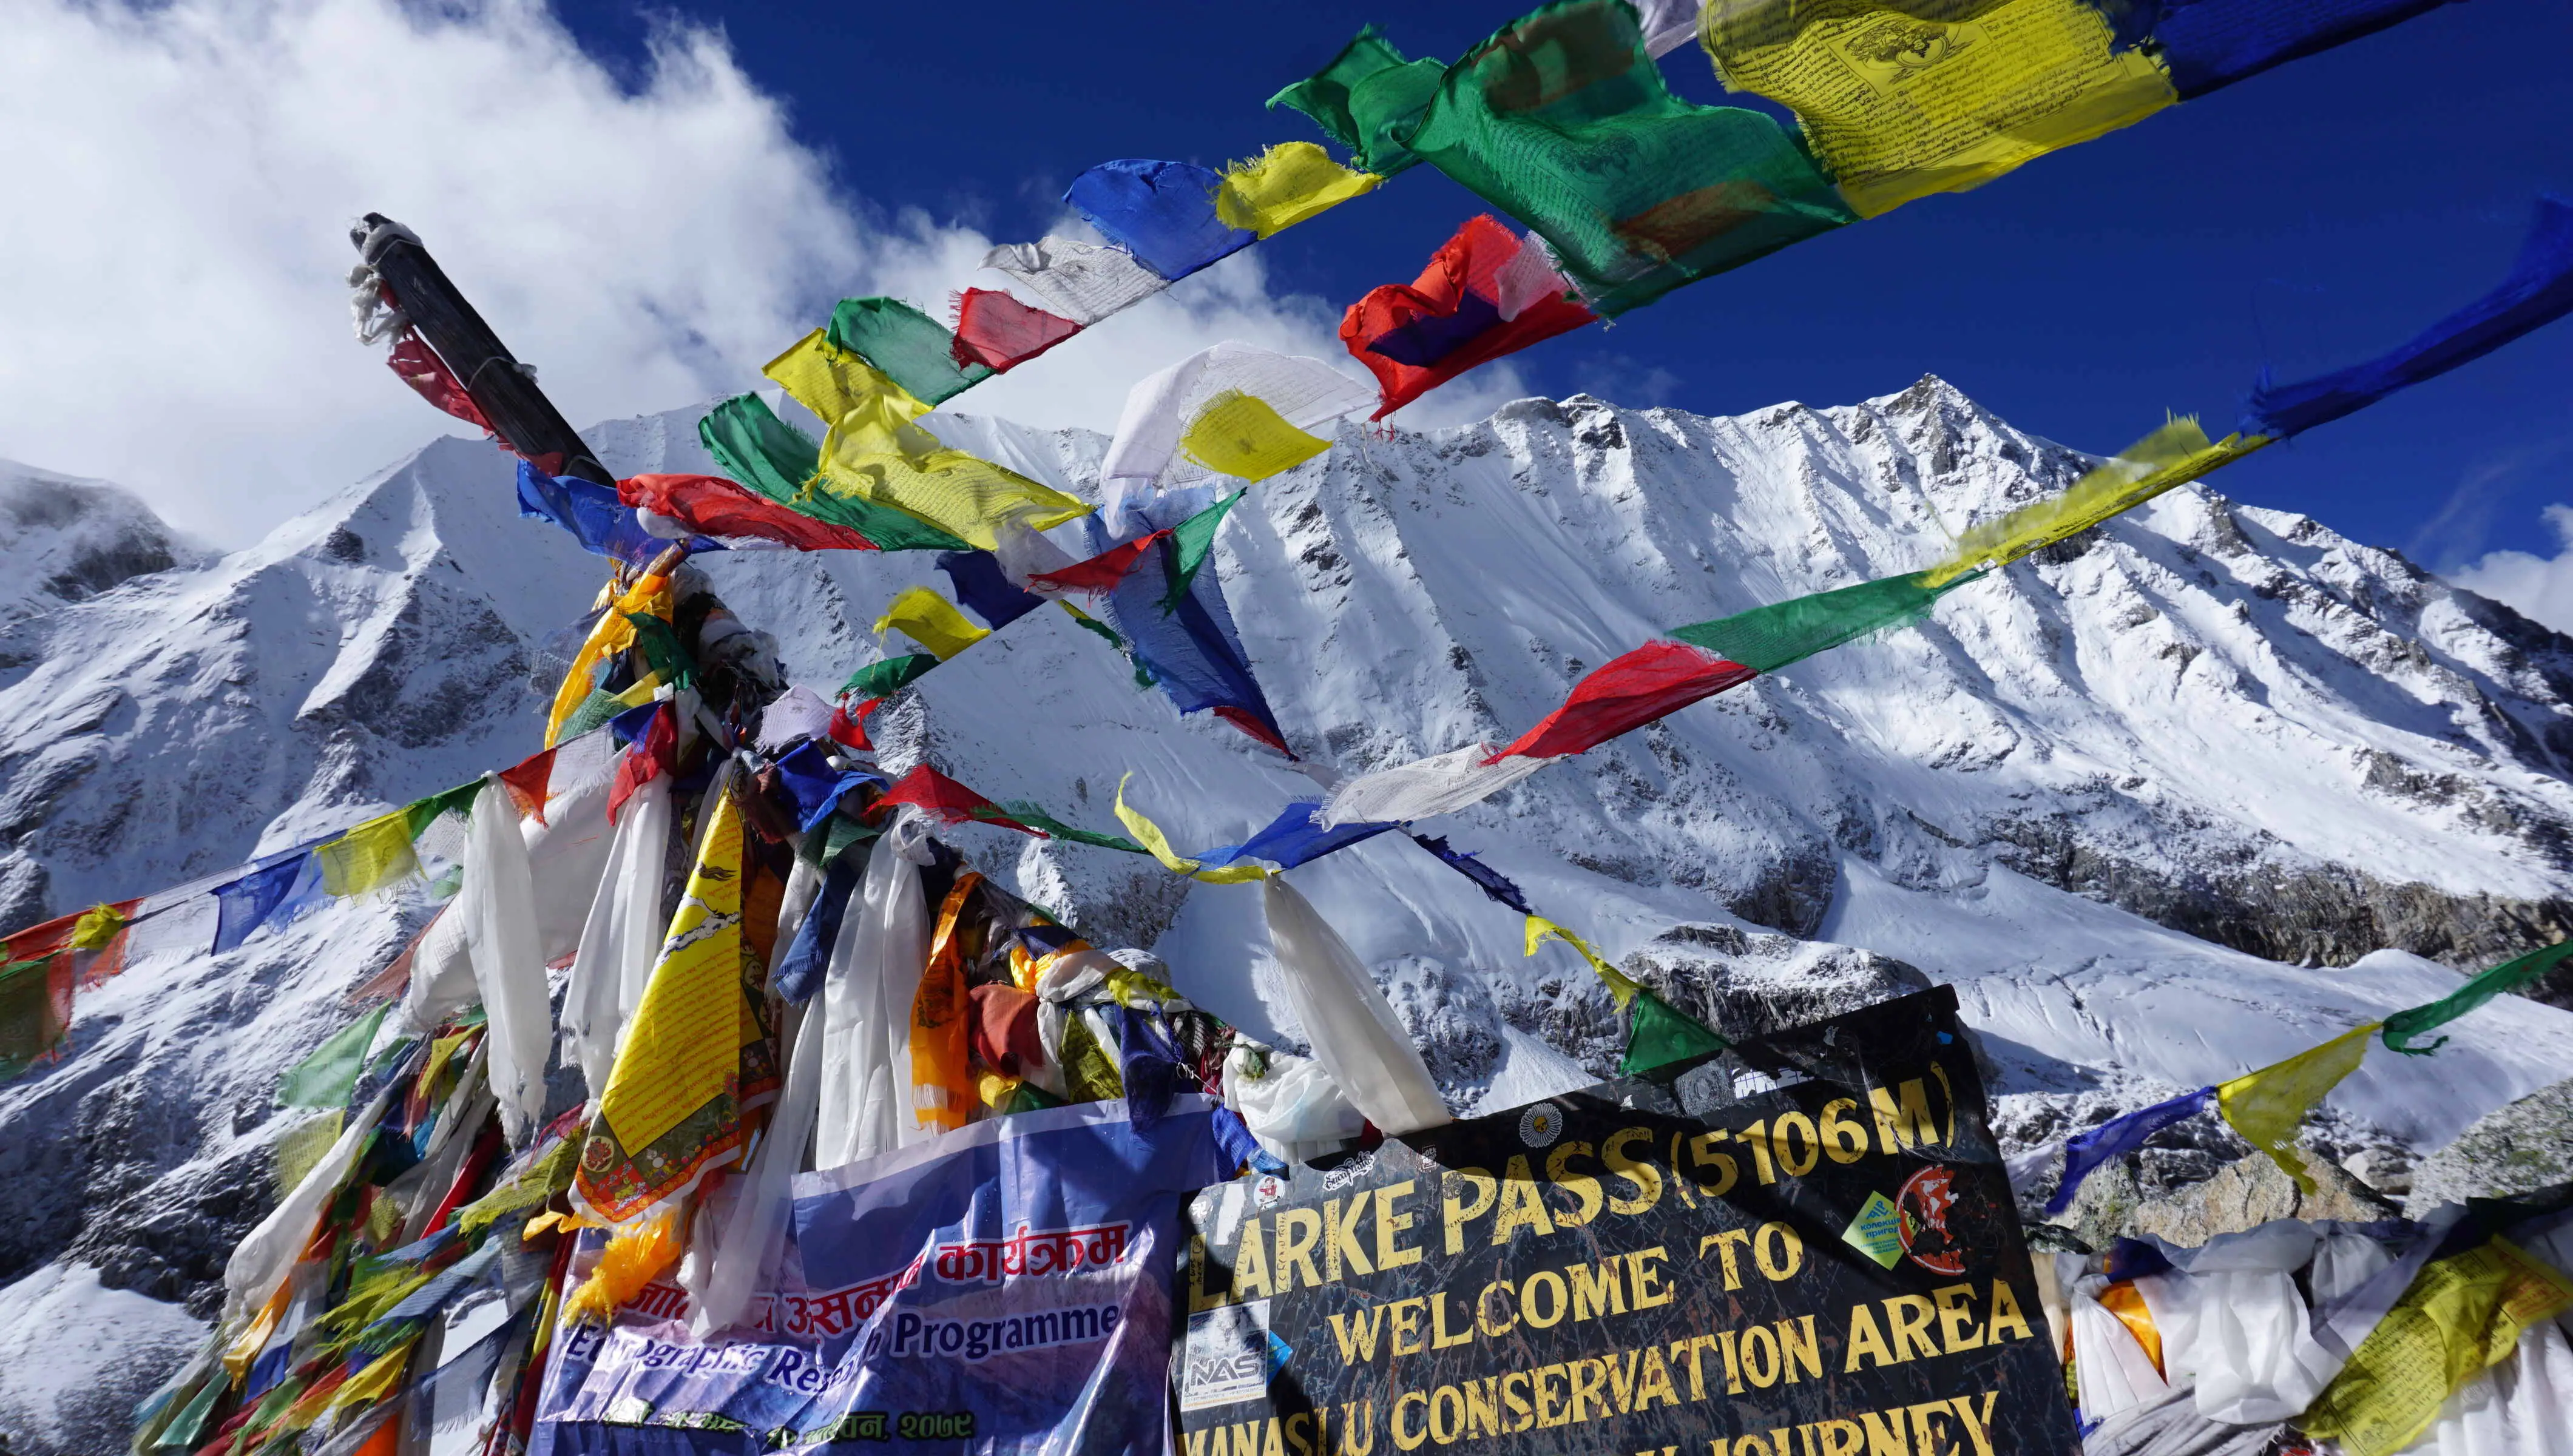 Manaslu Trekking Permit Cost, Fees, and Regulations | Complete Guide